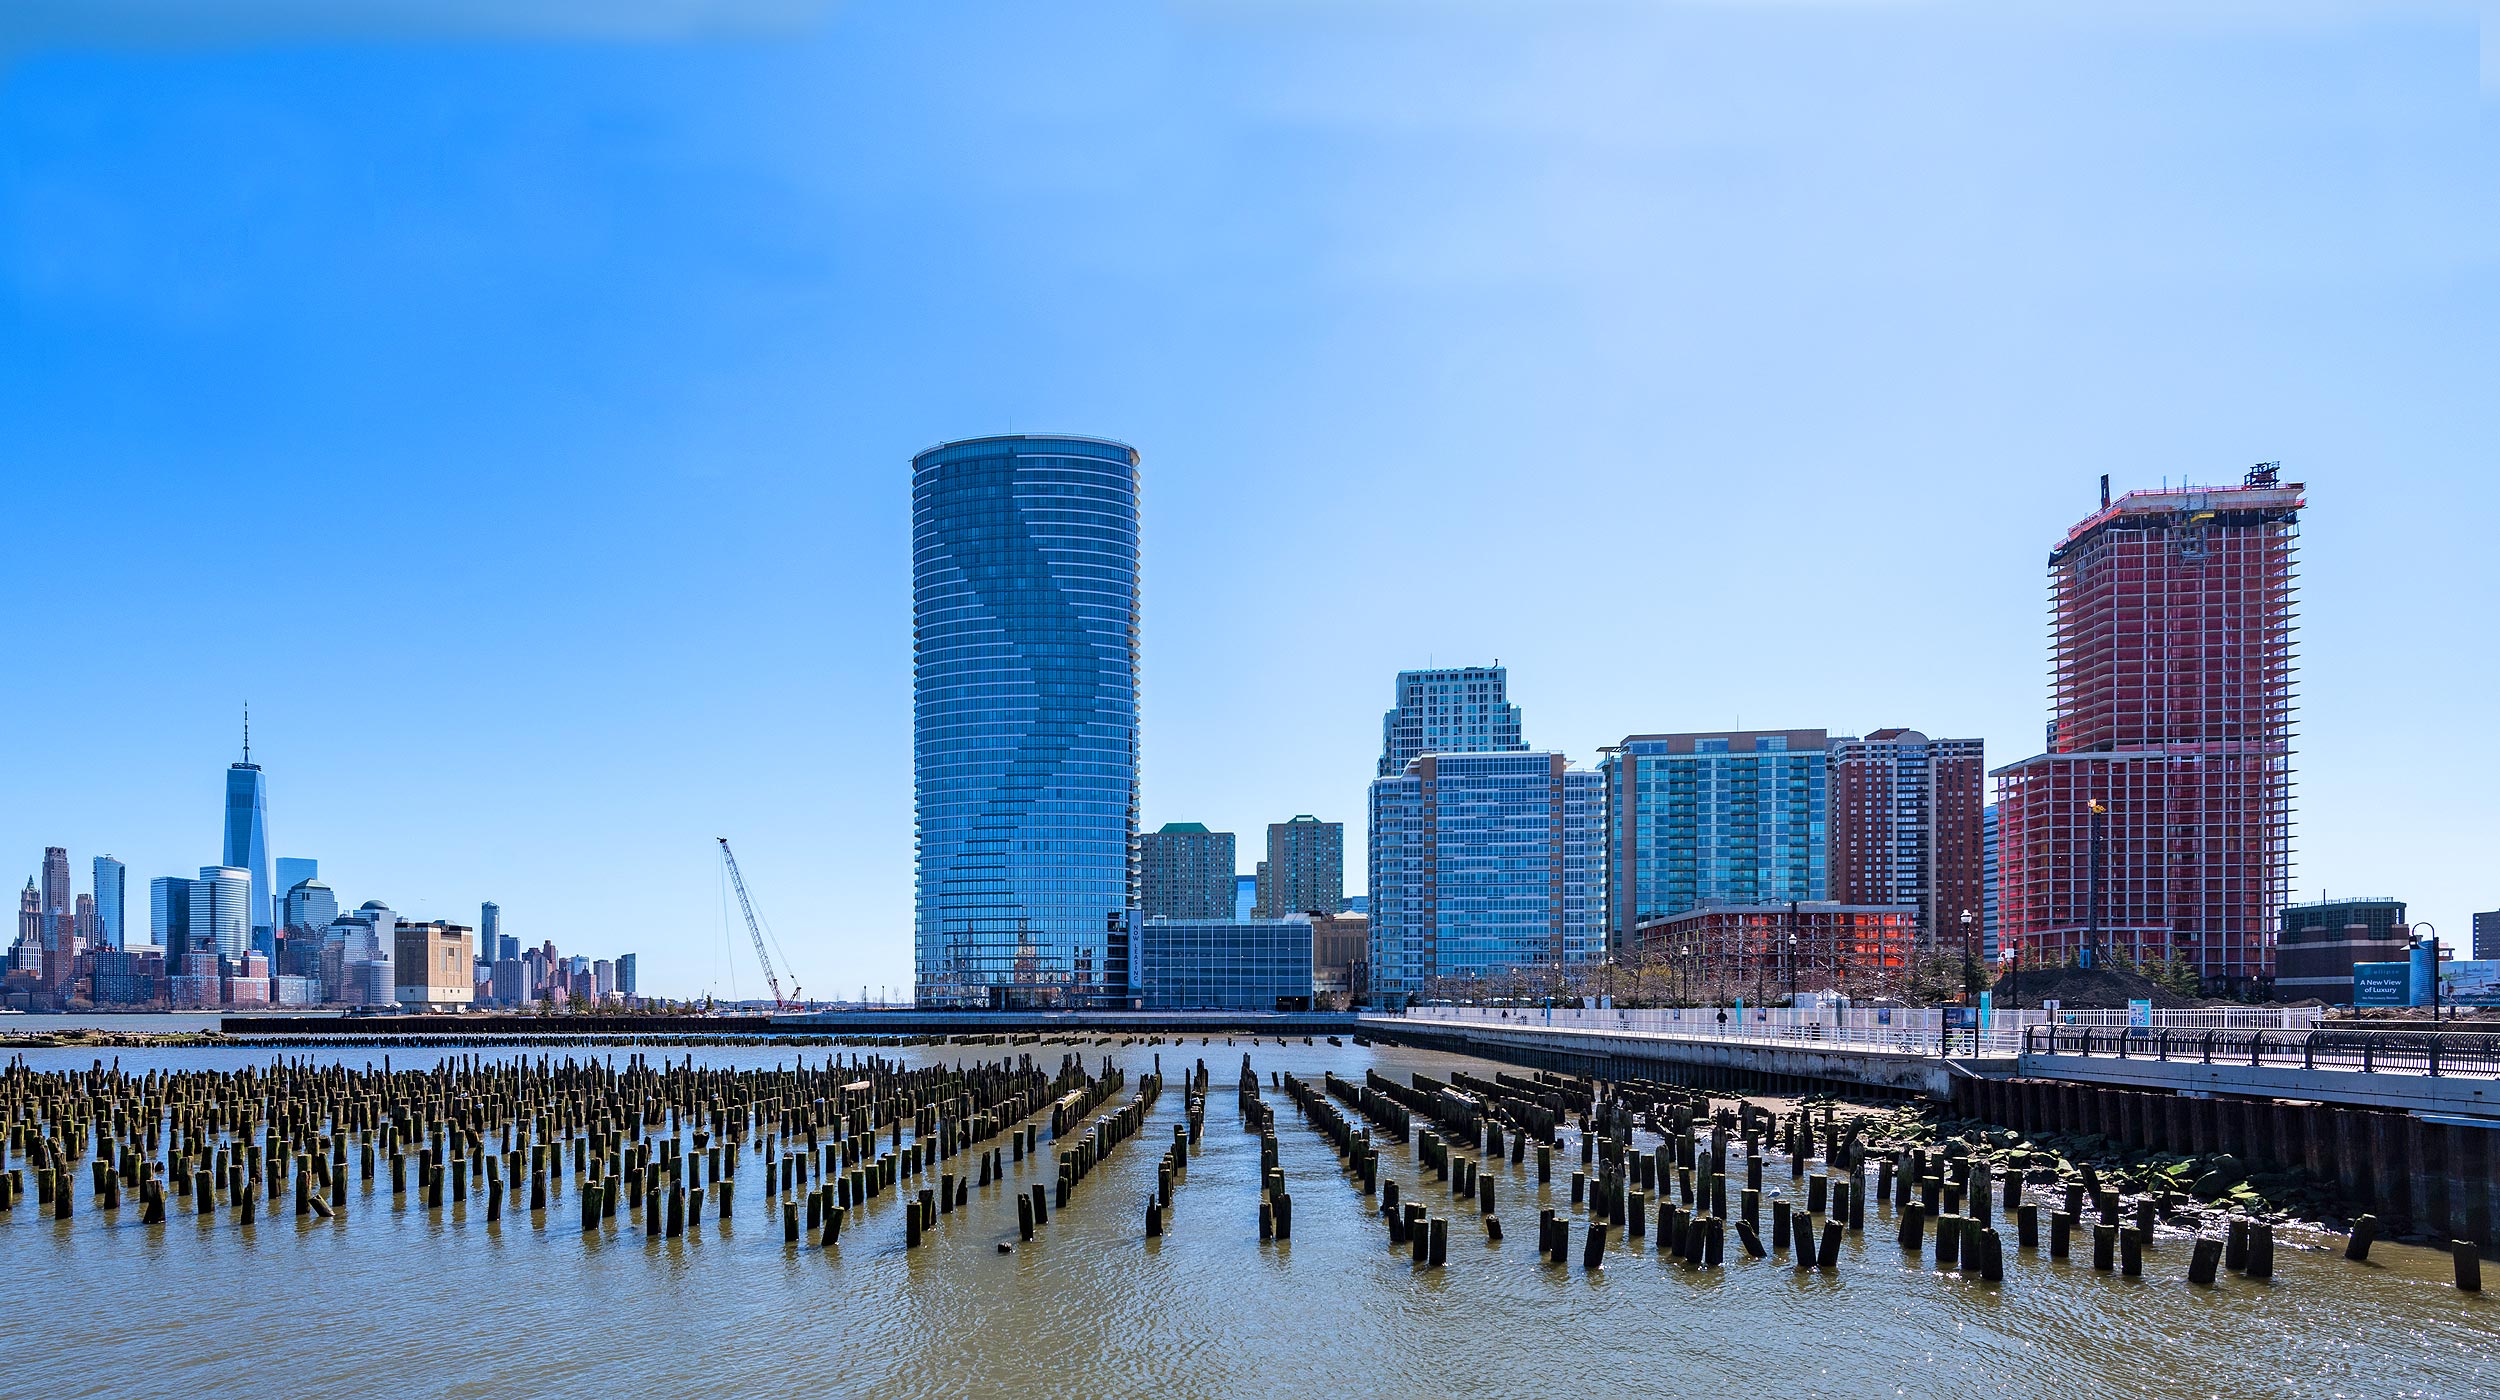 Located along the Hudson River waterfront overlooking Manhattan’s skyline, 75 Park Lane is designed to be the pinnacle of residential quality and development in Jersey City.